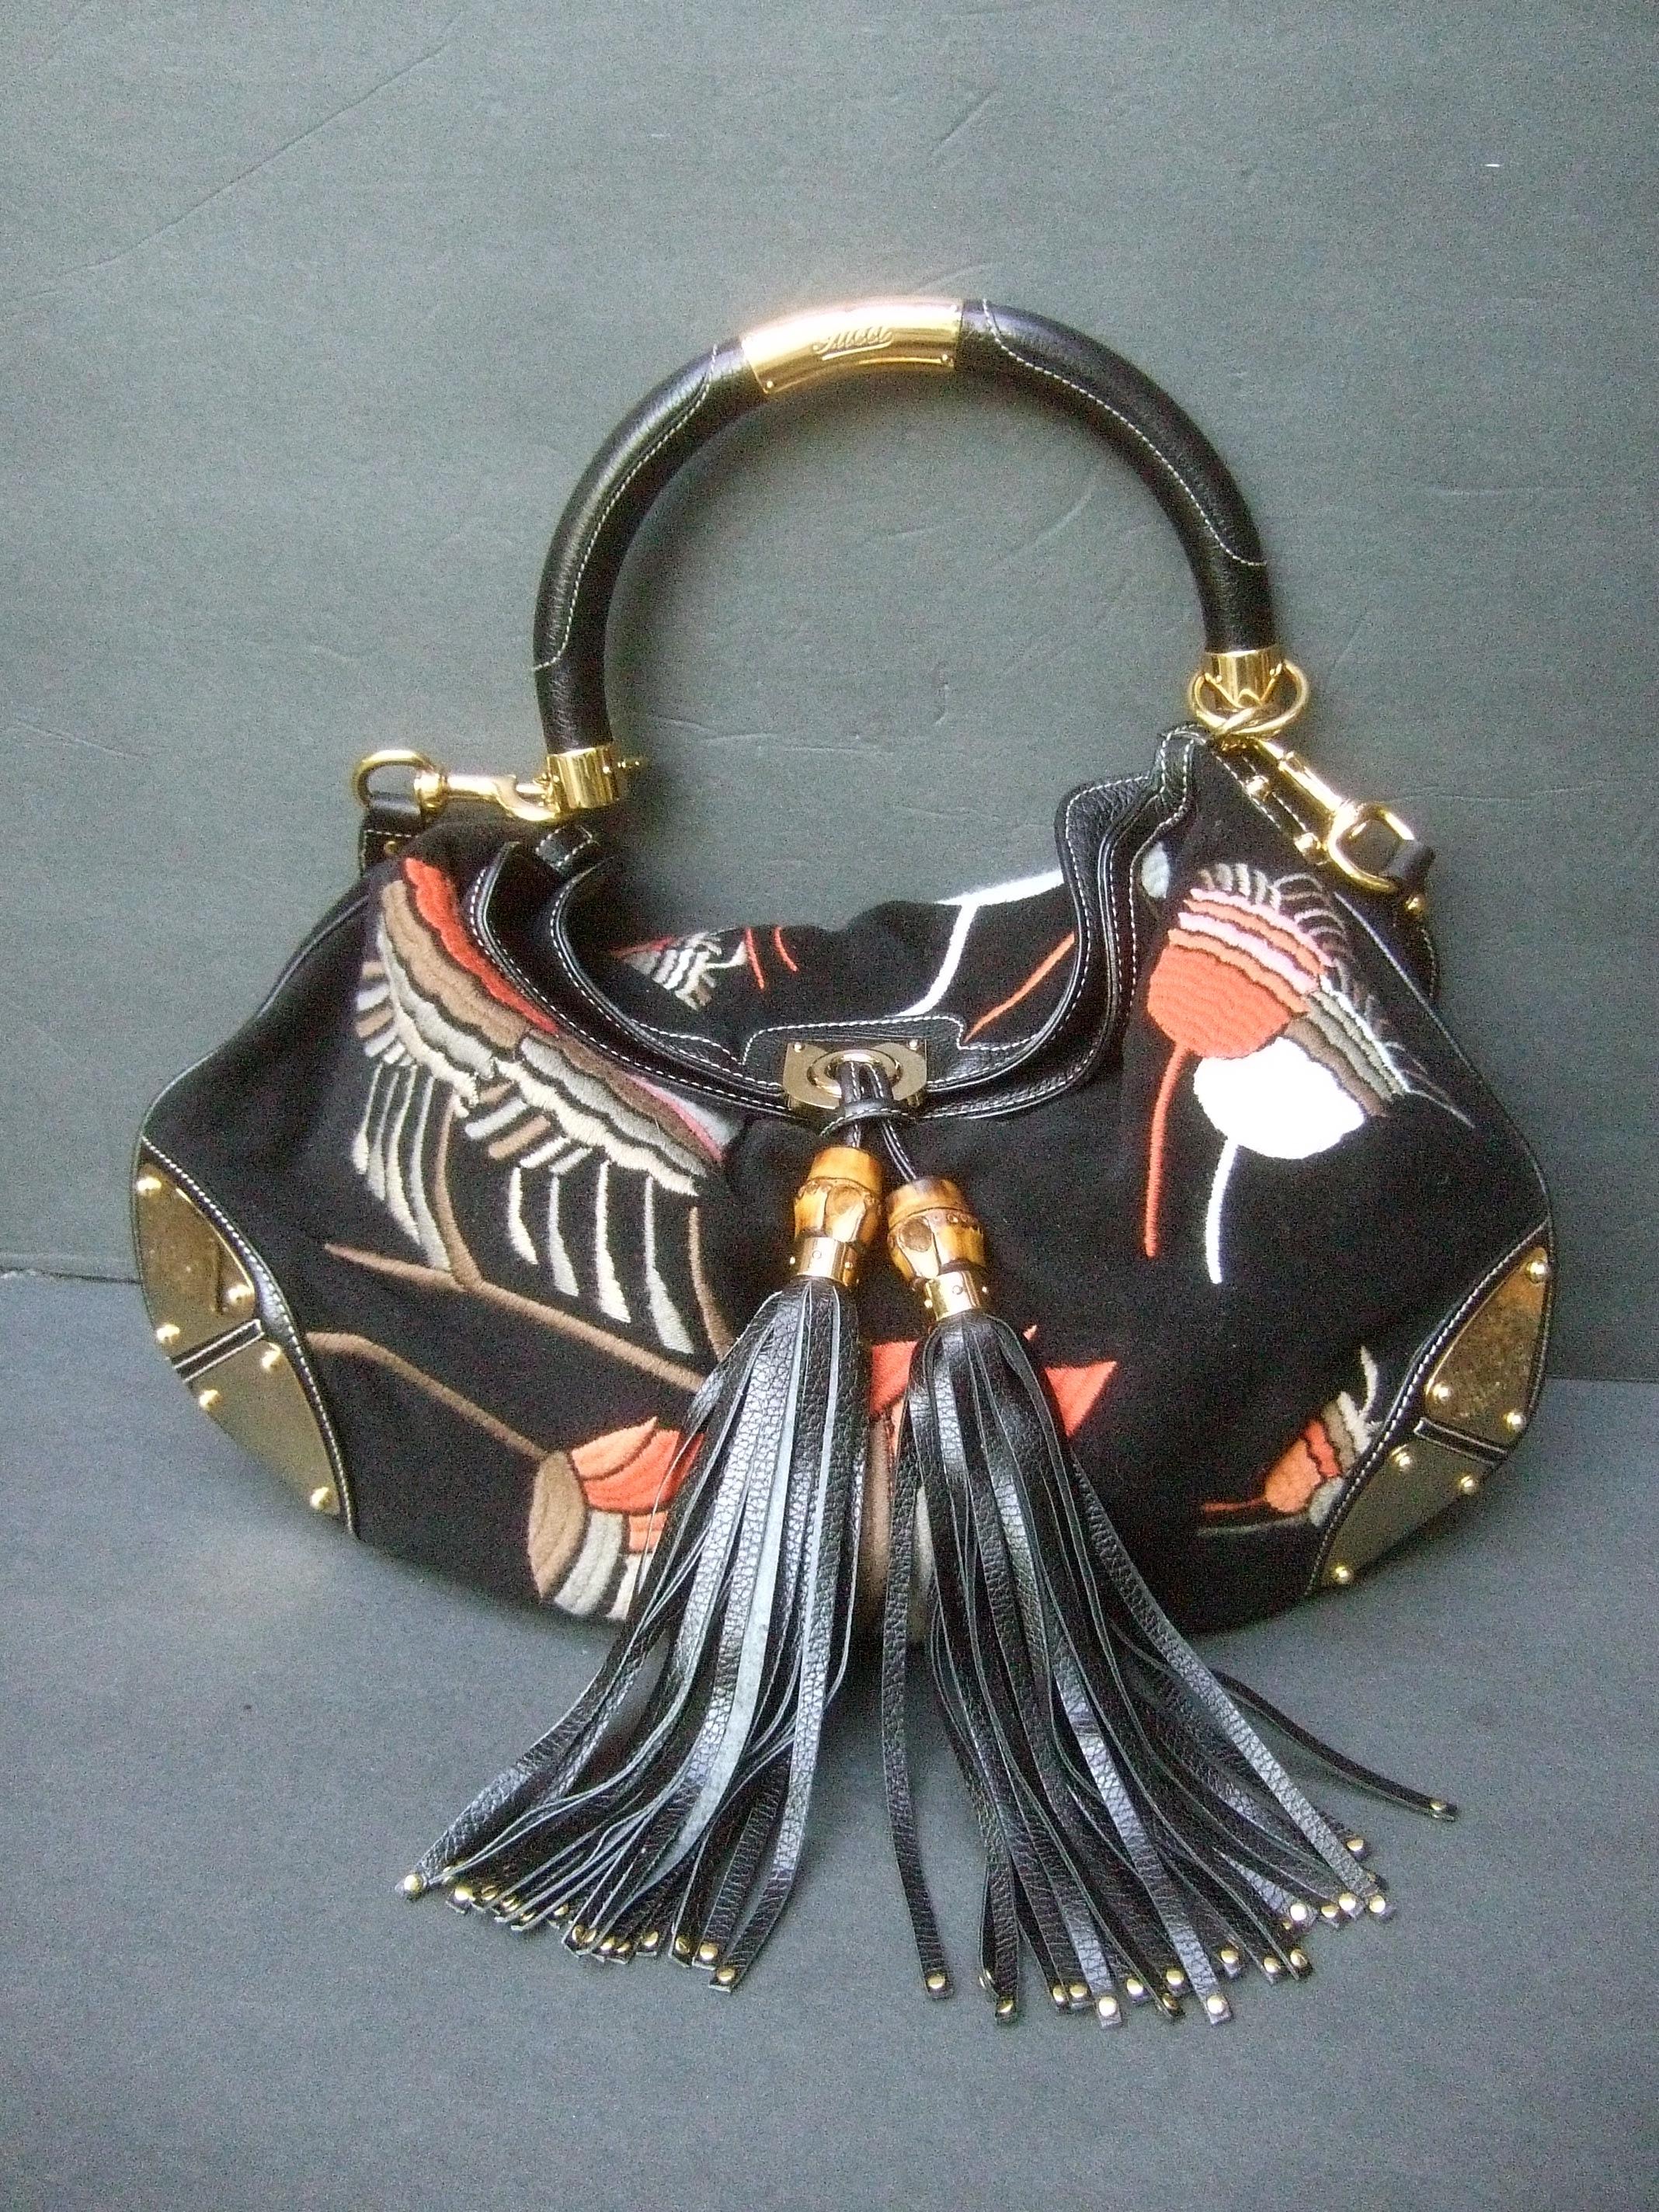 Gucci Italy Rare Embroidered Black Wool Large Handbag - Shoulder Bag c 1990s In Good Condition In University City, MO